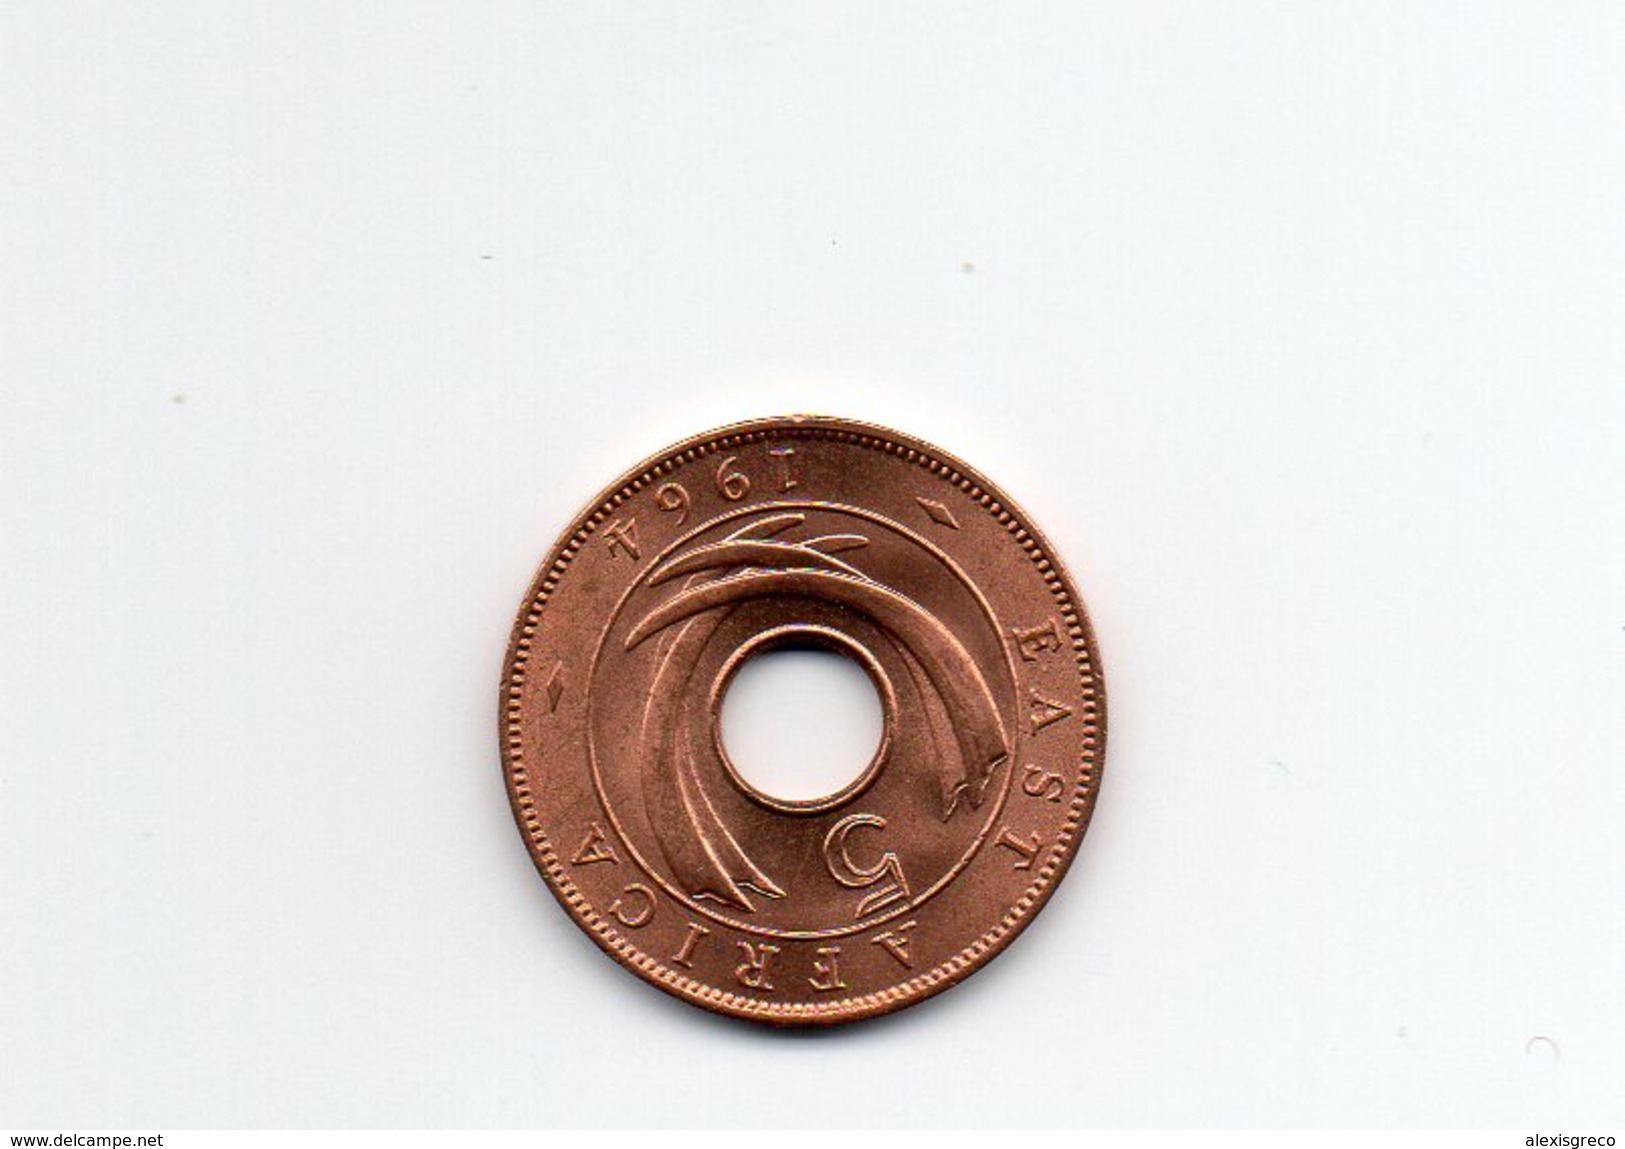 BRITISH EAST AFRICA 1964 UNCIRCULATED COIN FIVE CENTS BRONZE (Post-Independence Issue). - British Colony